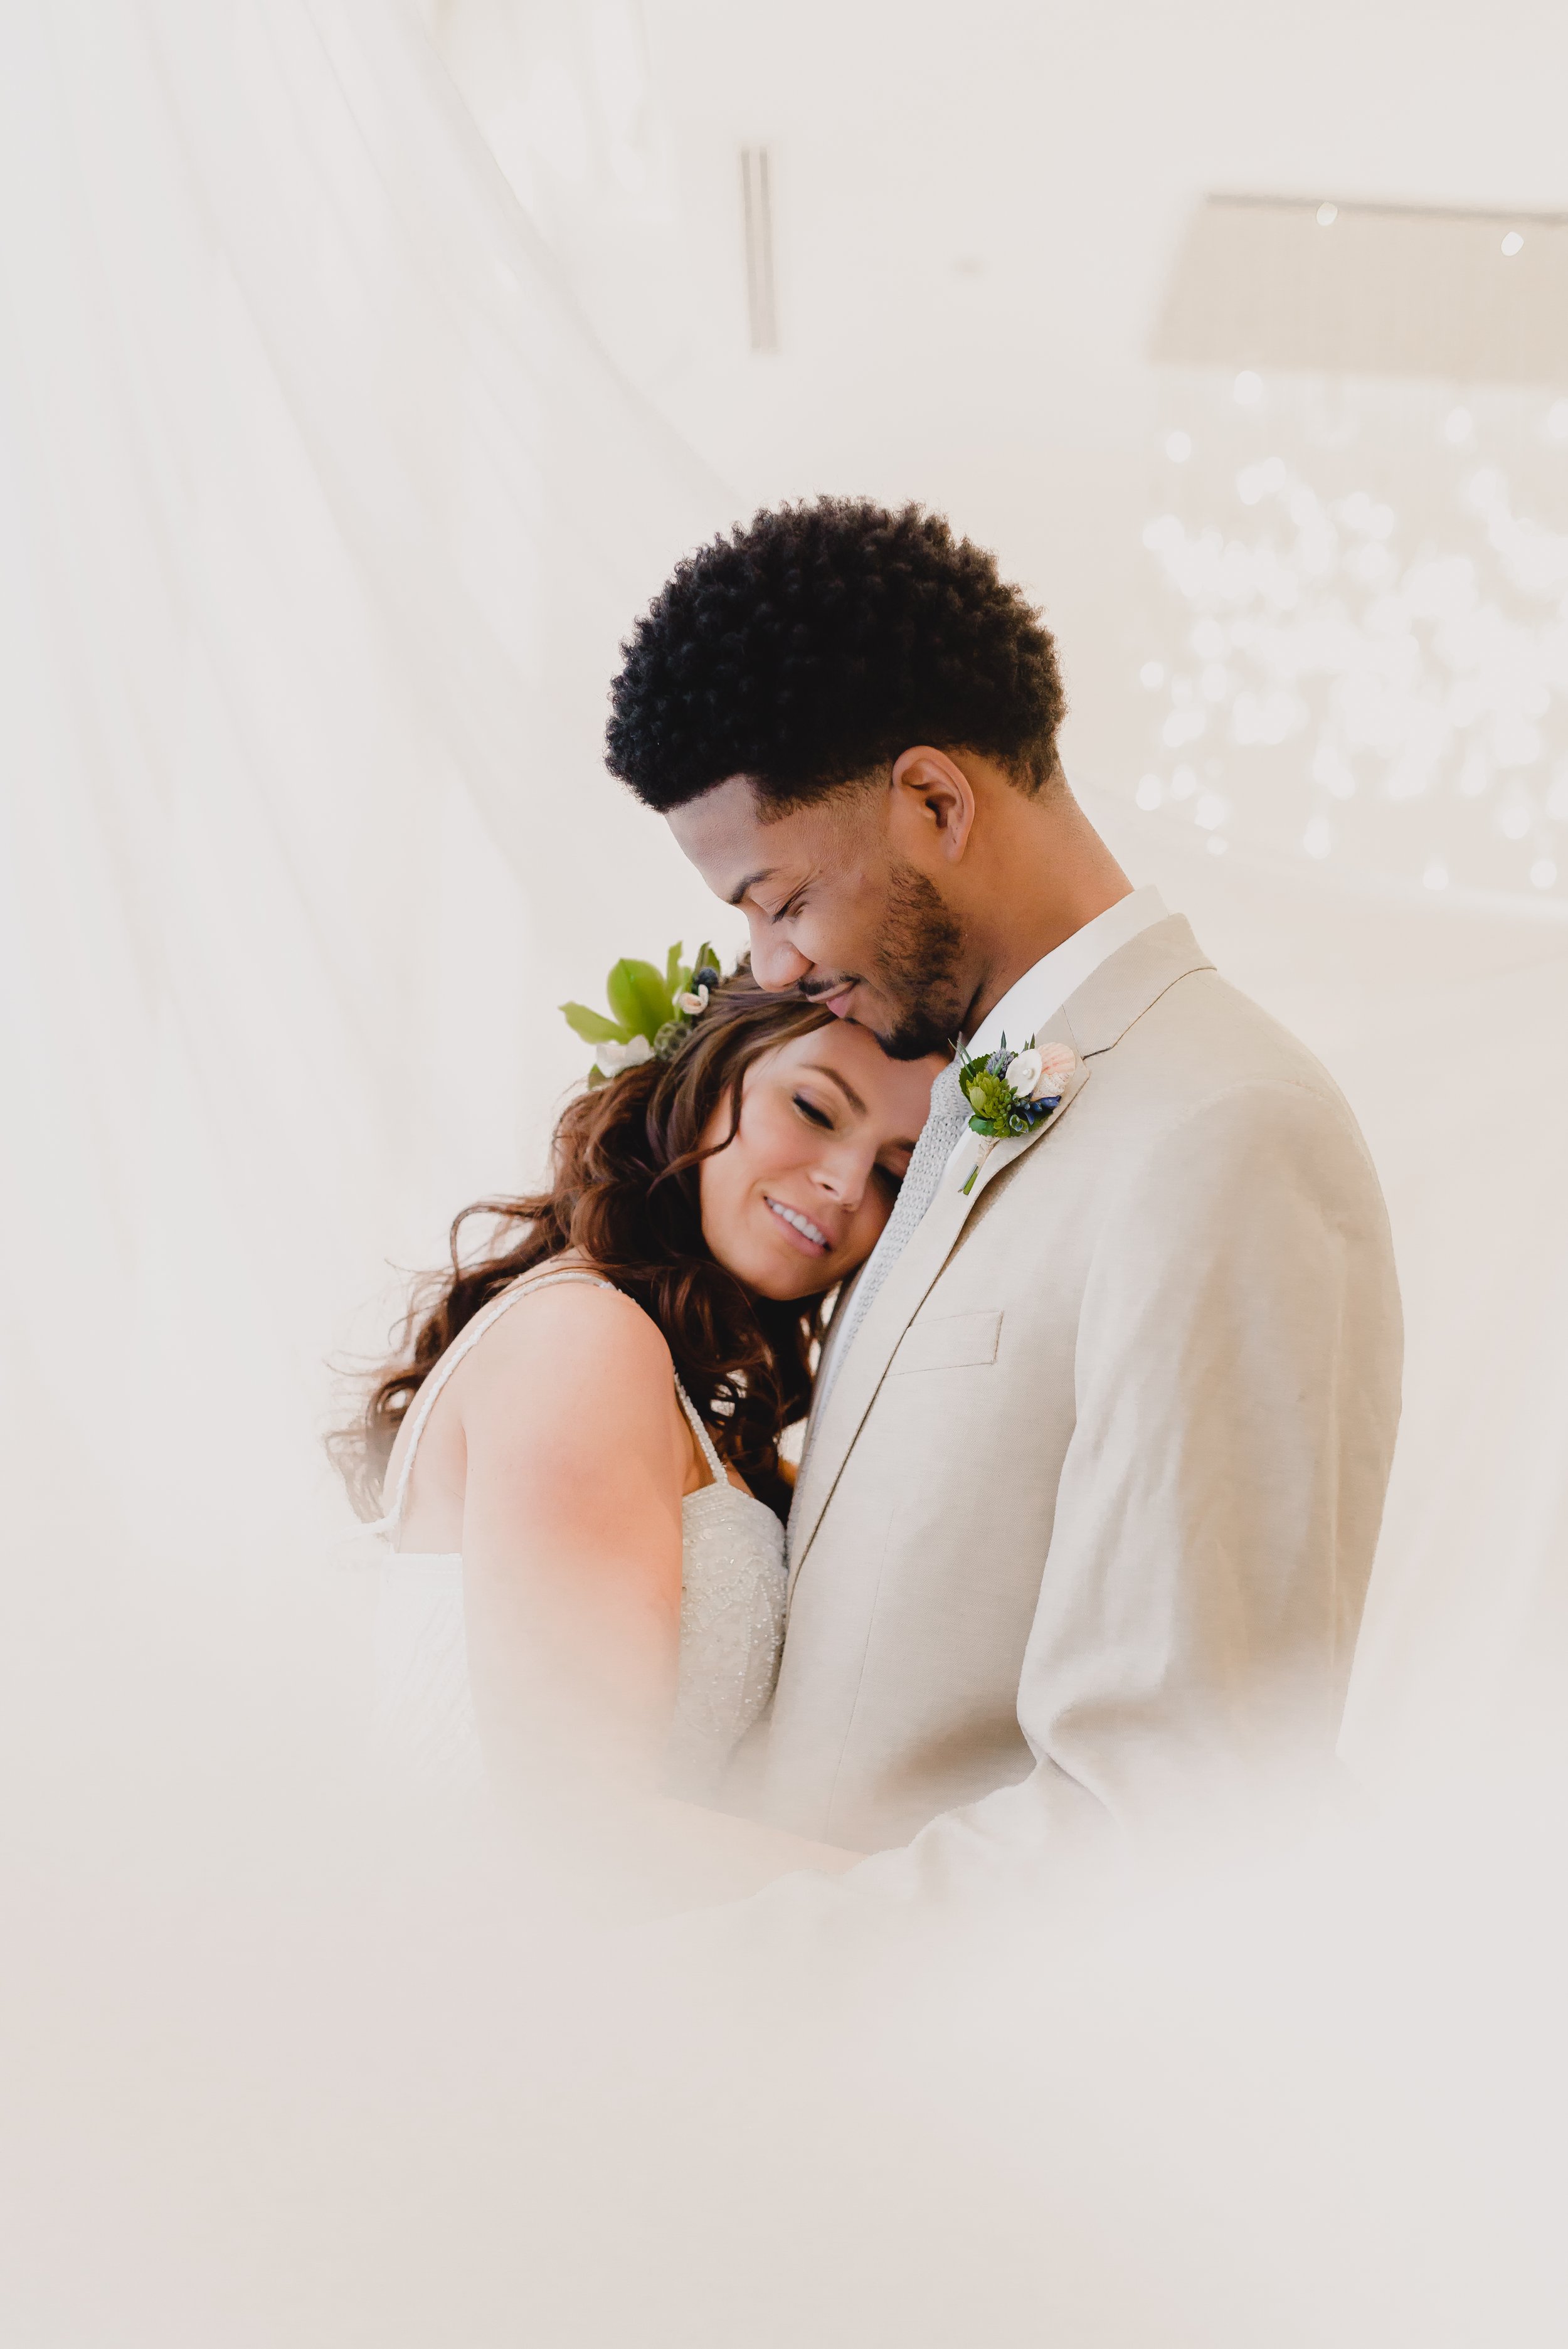  Black groom and white bride, Wedding Photography 